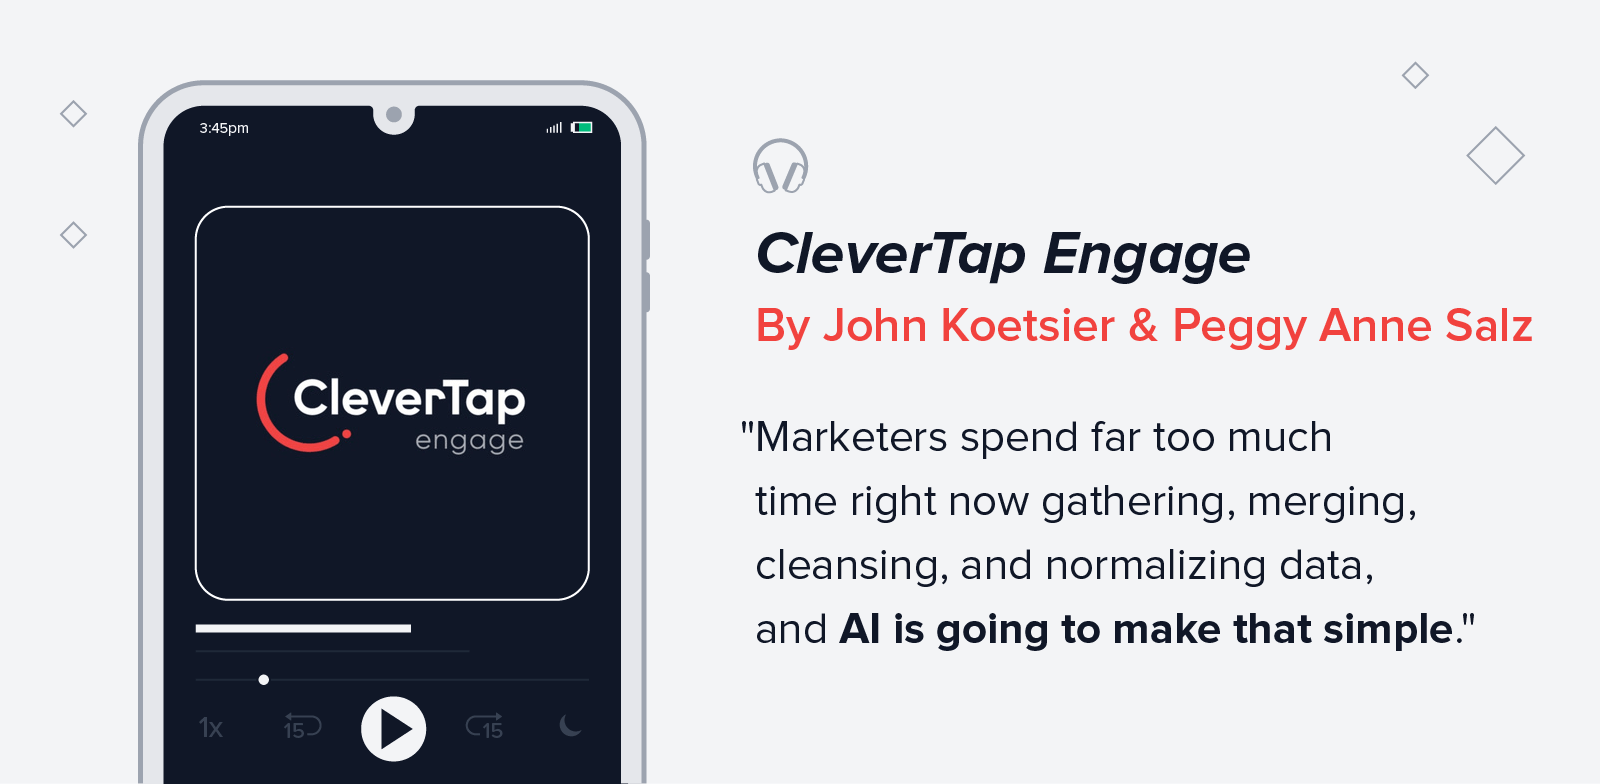 quote from Clevertap Engage